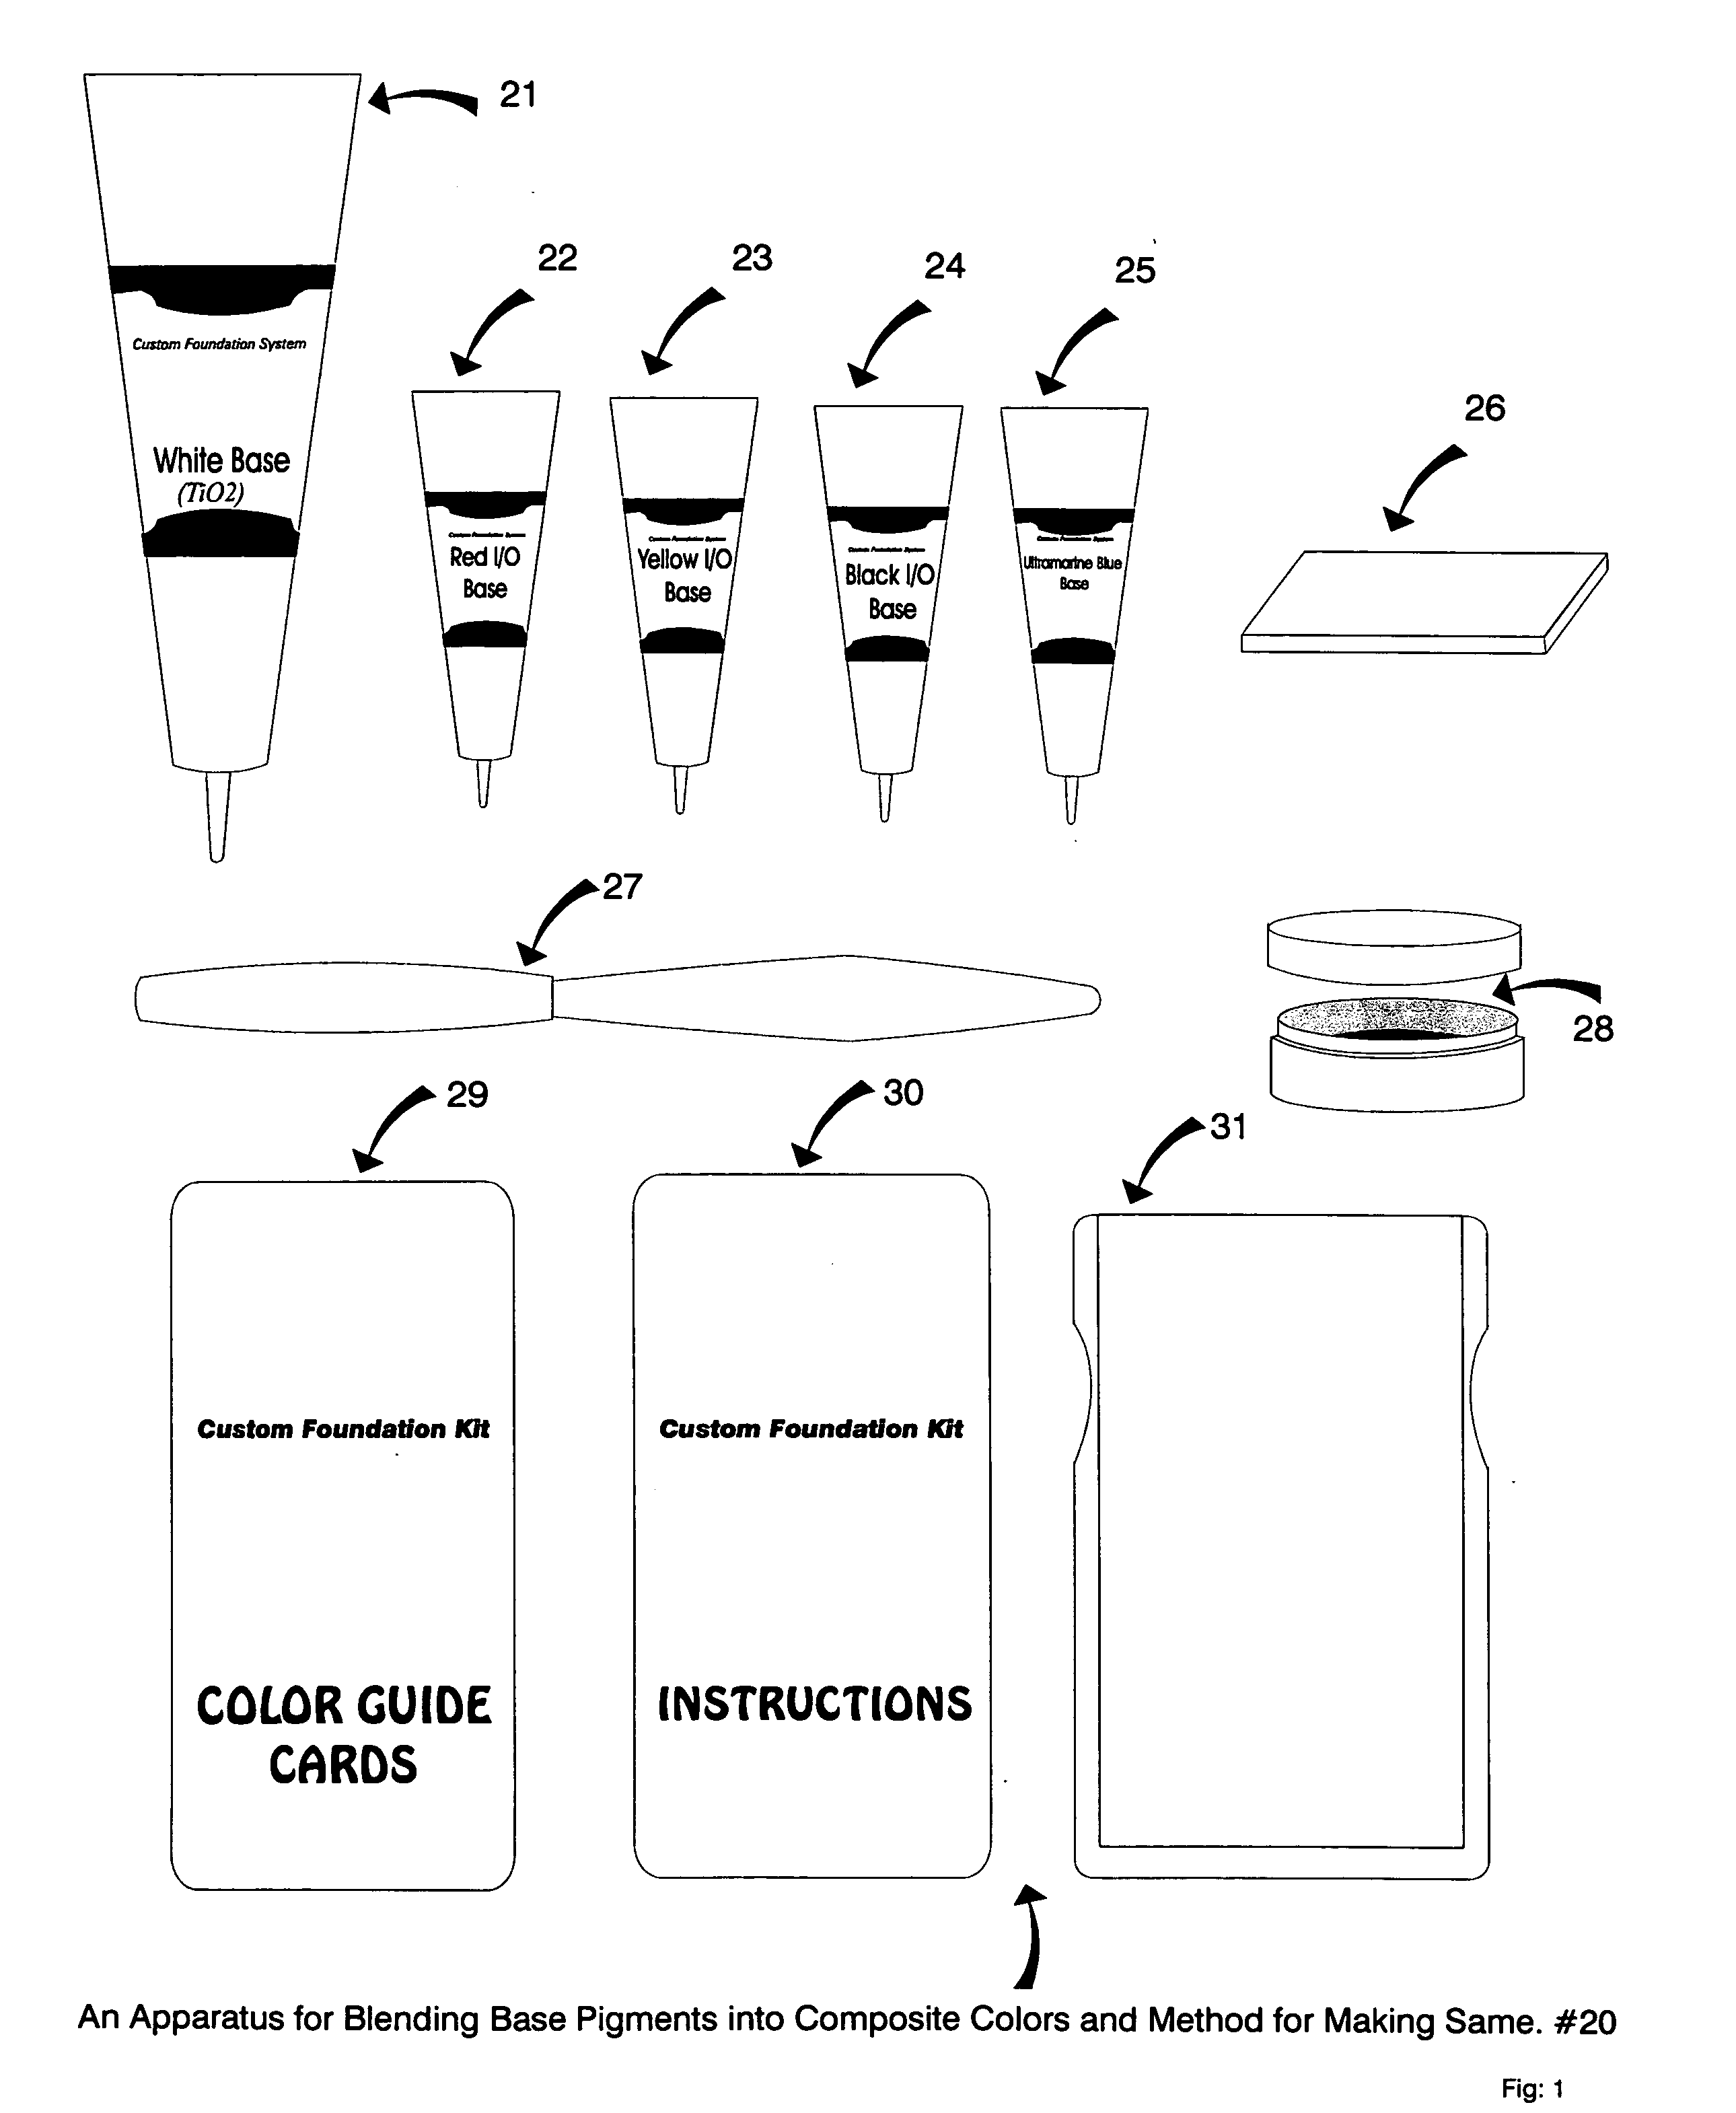 Apparatus for blending base pigments into composite colors and method for making same